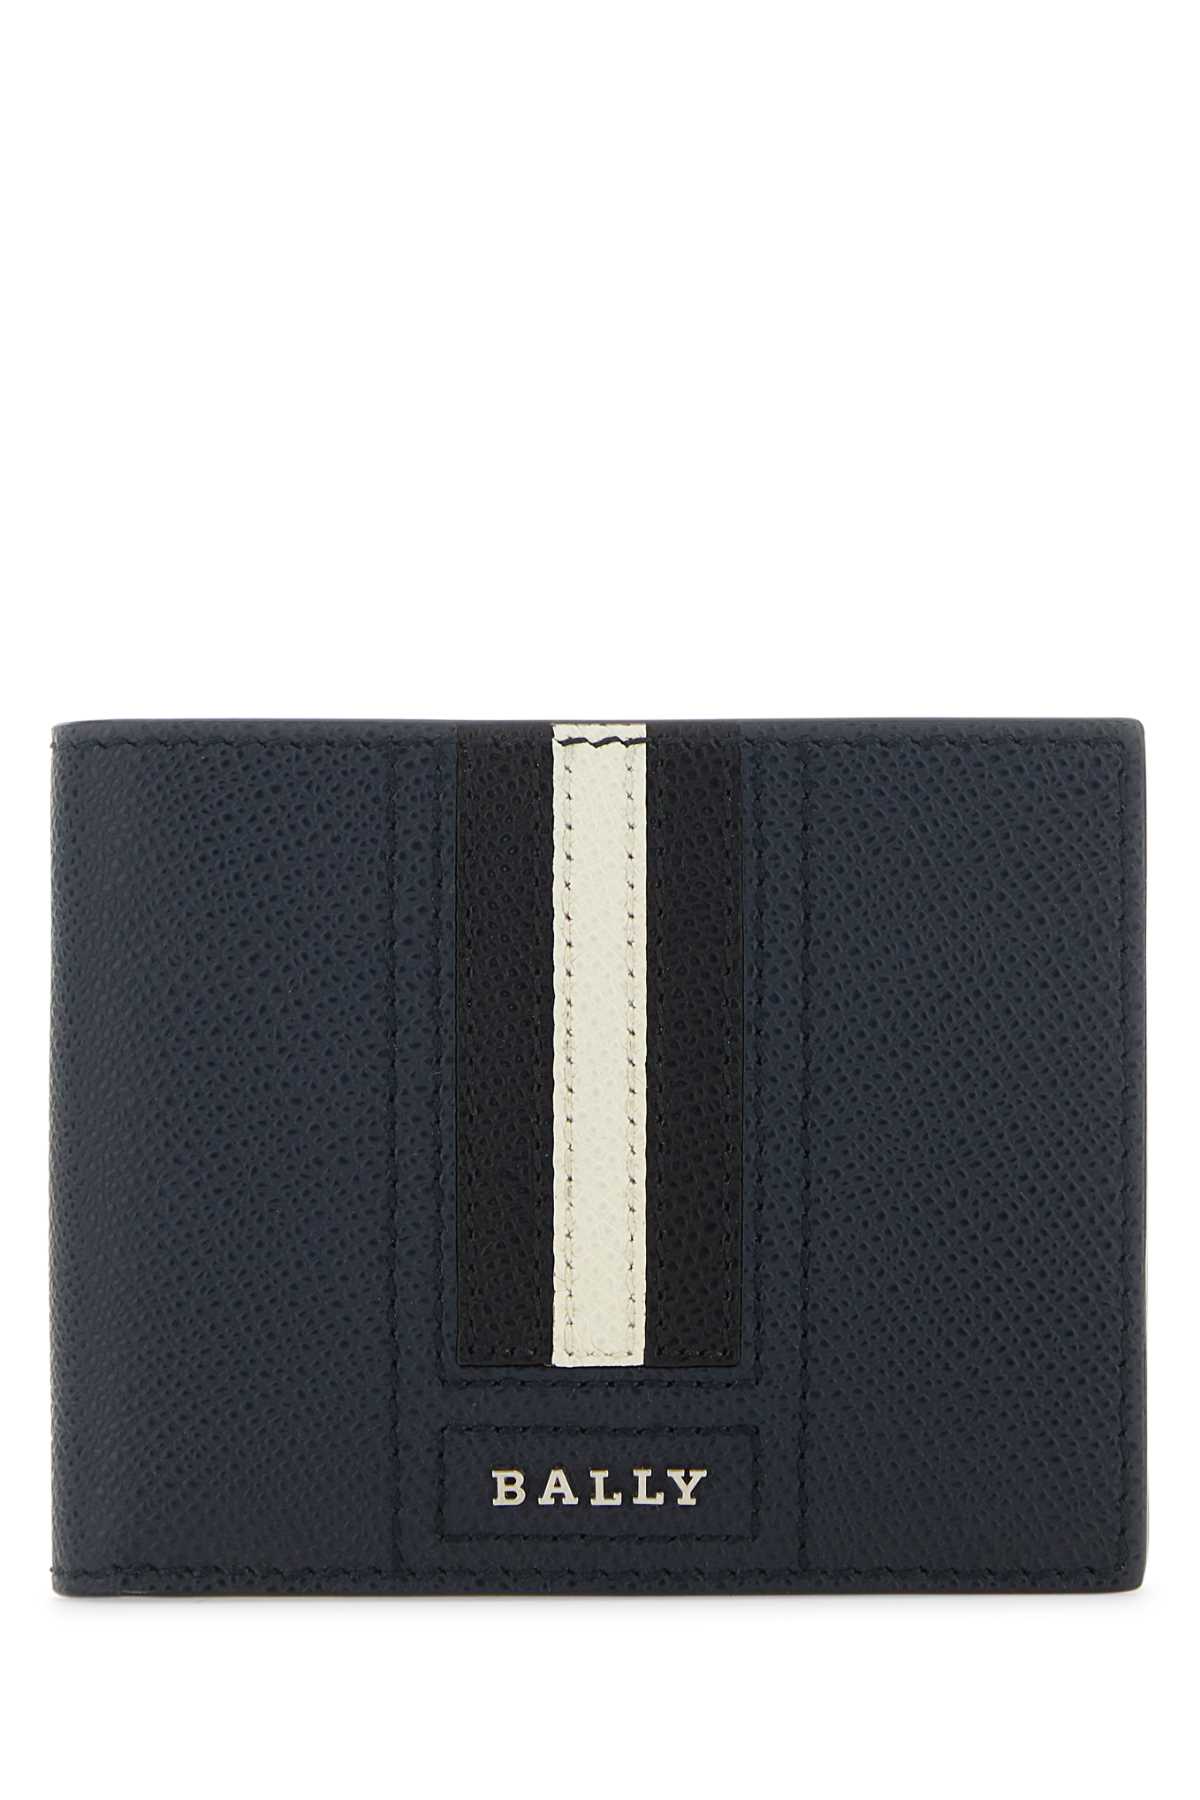 Bally Blue Leather Wallet